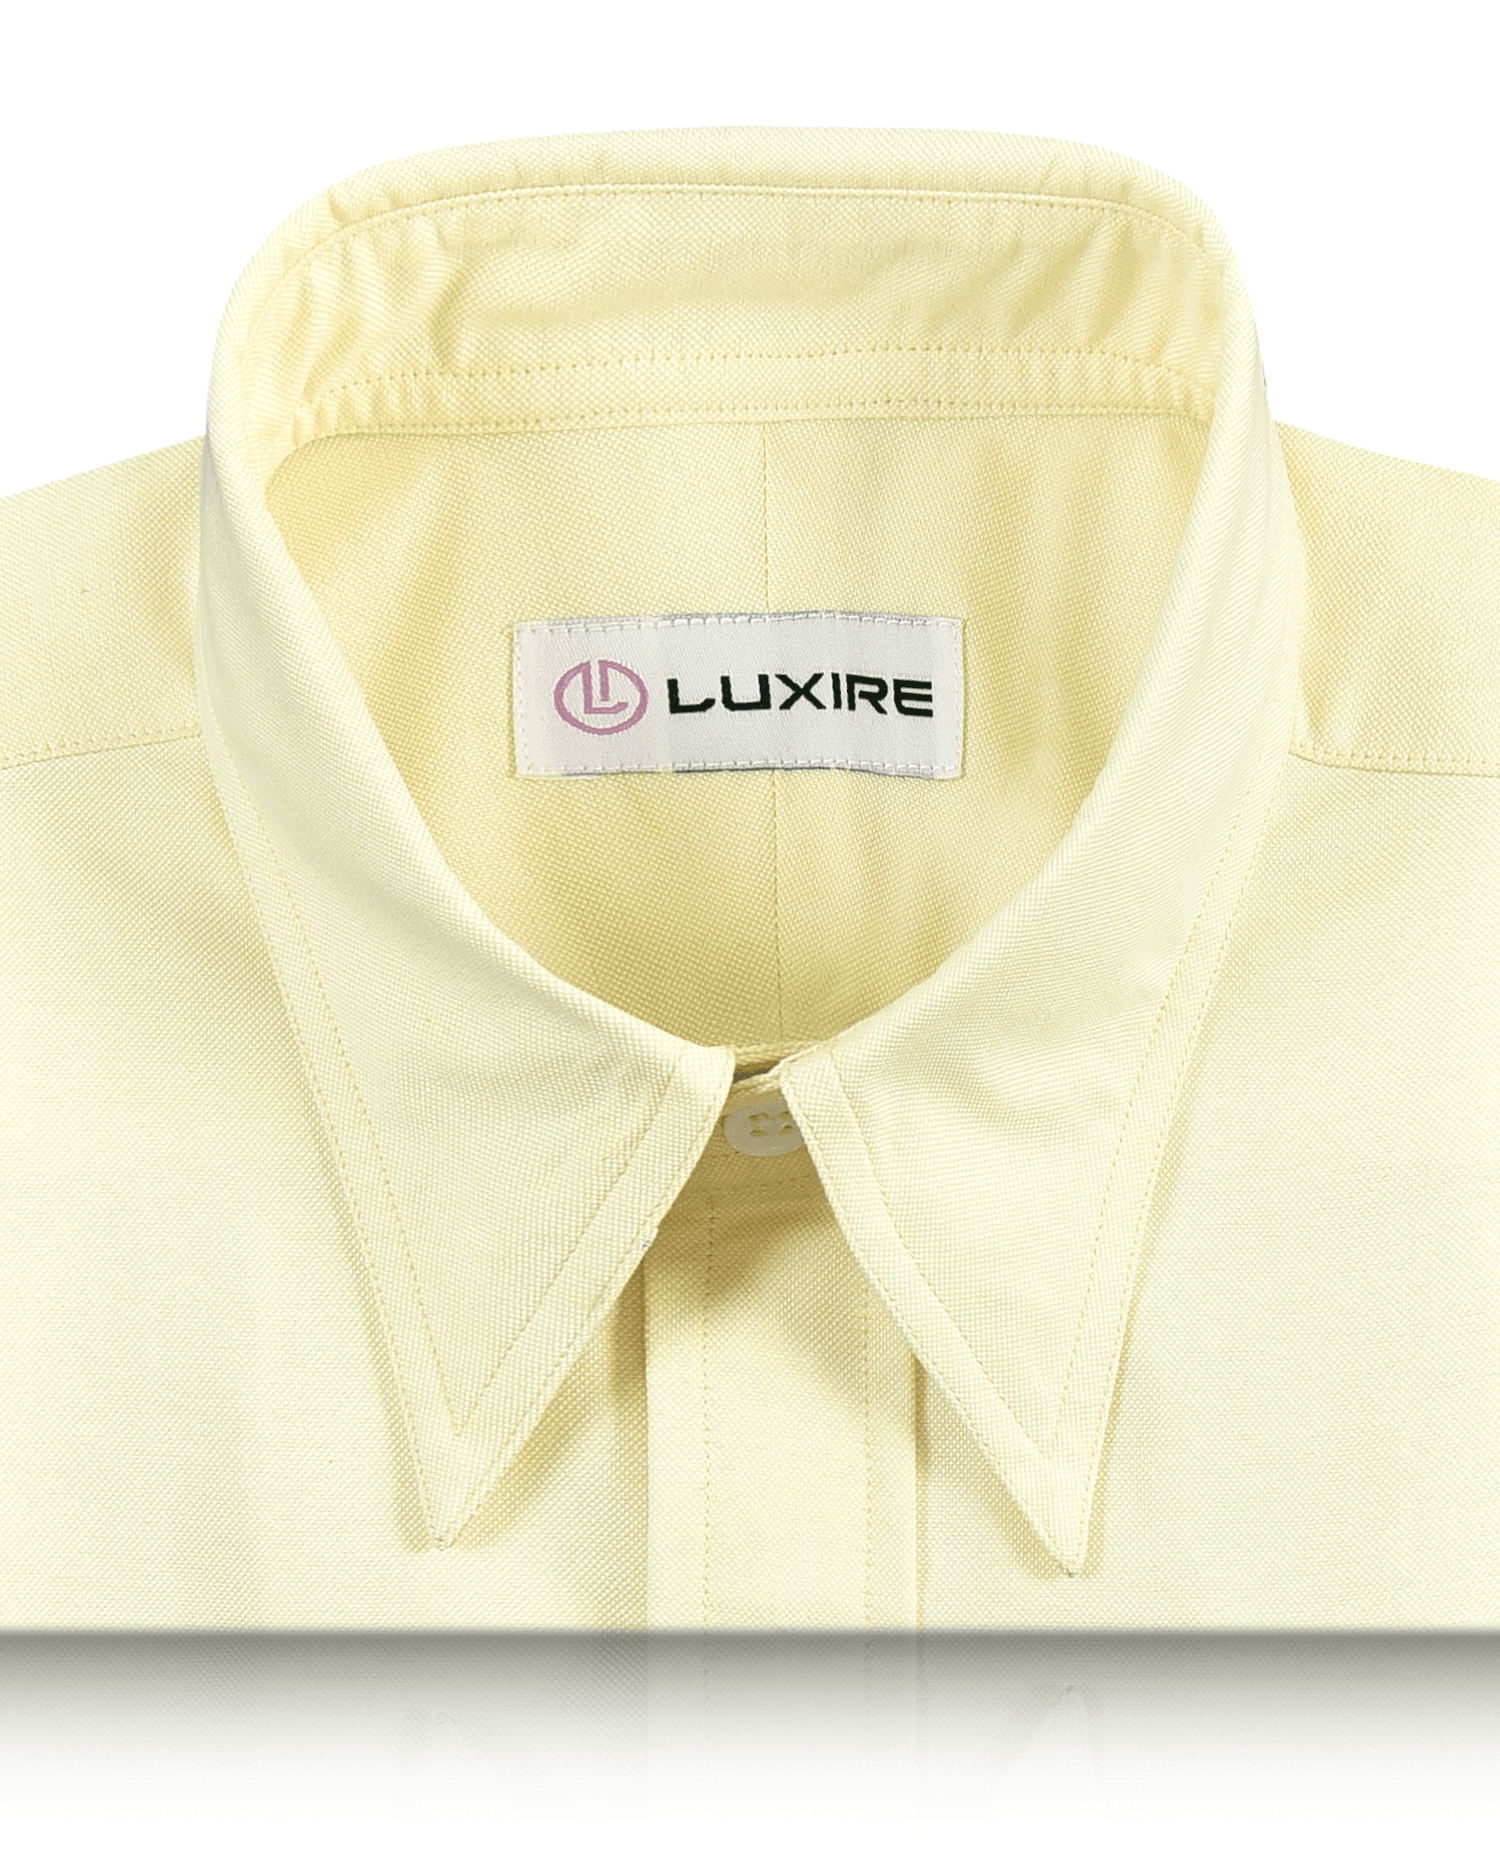 Collar of the custom oxford shirt for men by Luxire in light yellow